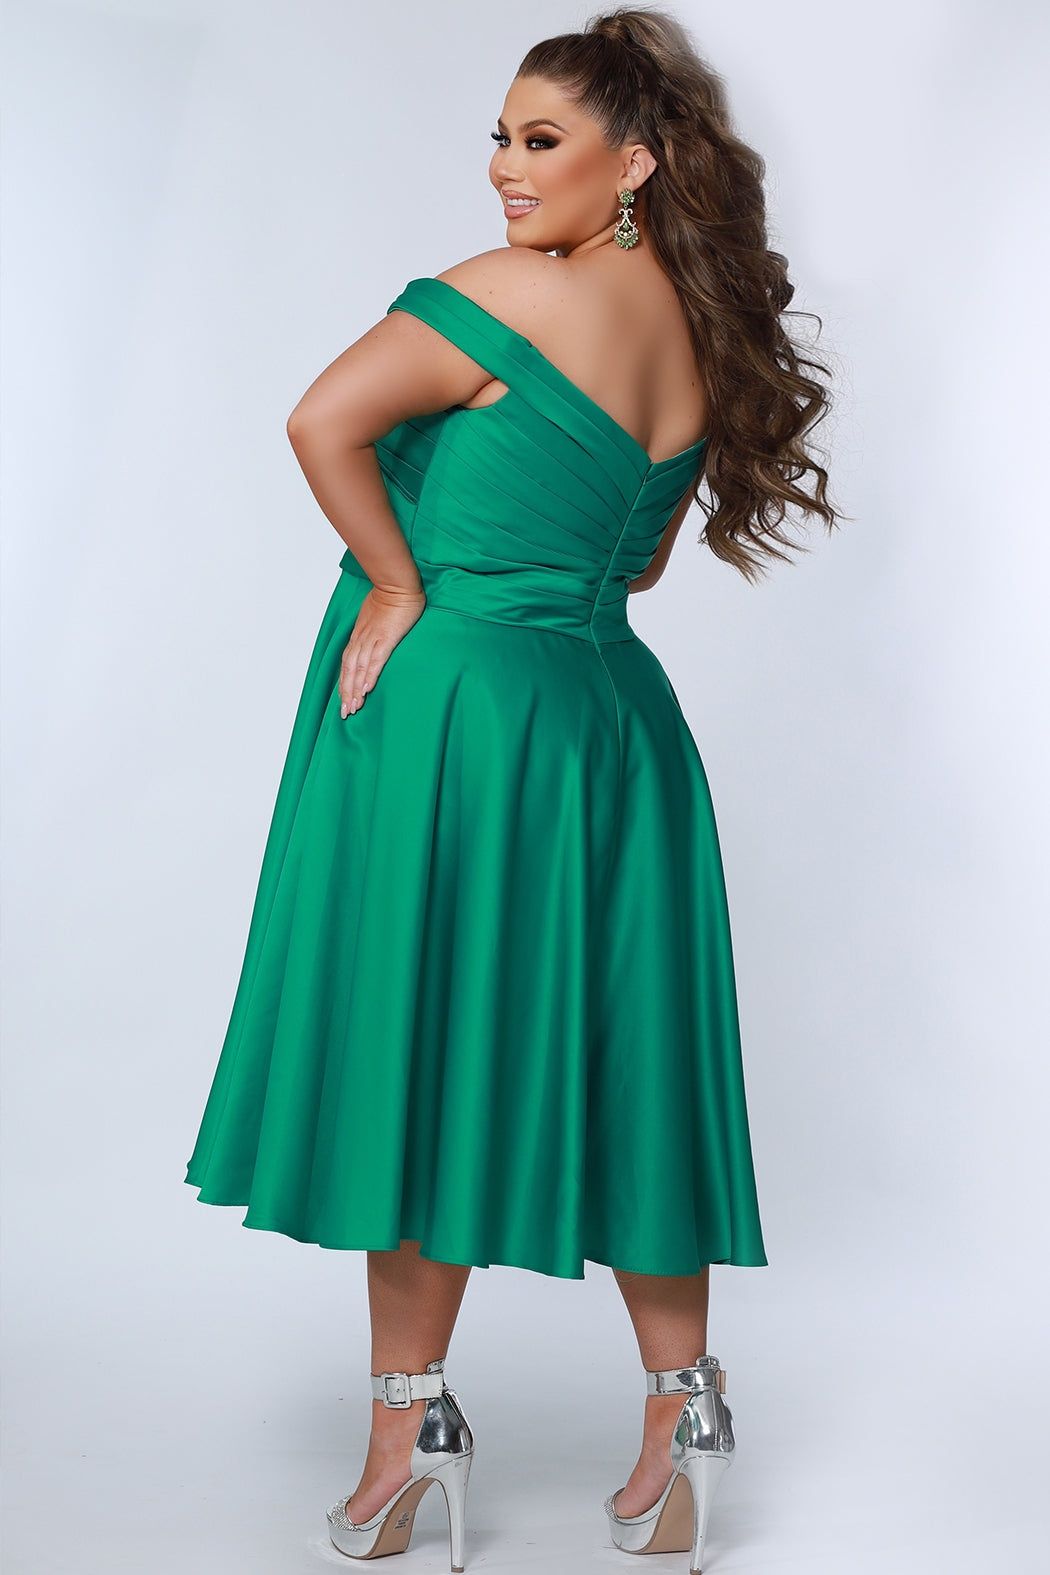 Style CE2301 Sydney's Closet Plus Size 22 Satin Emerald Black Cocktail Dress on Queenly